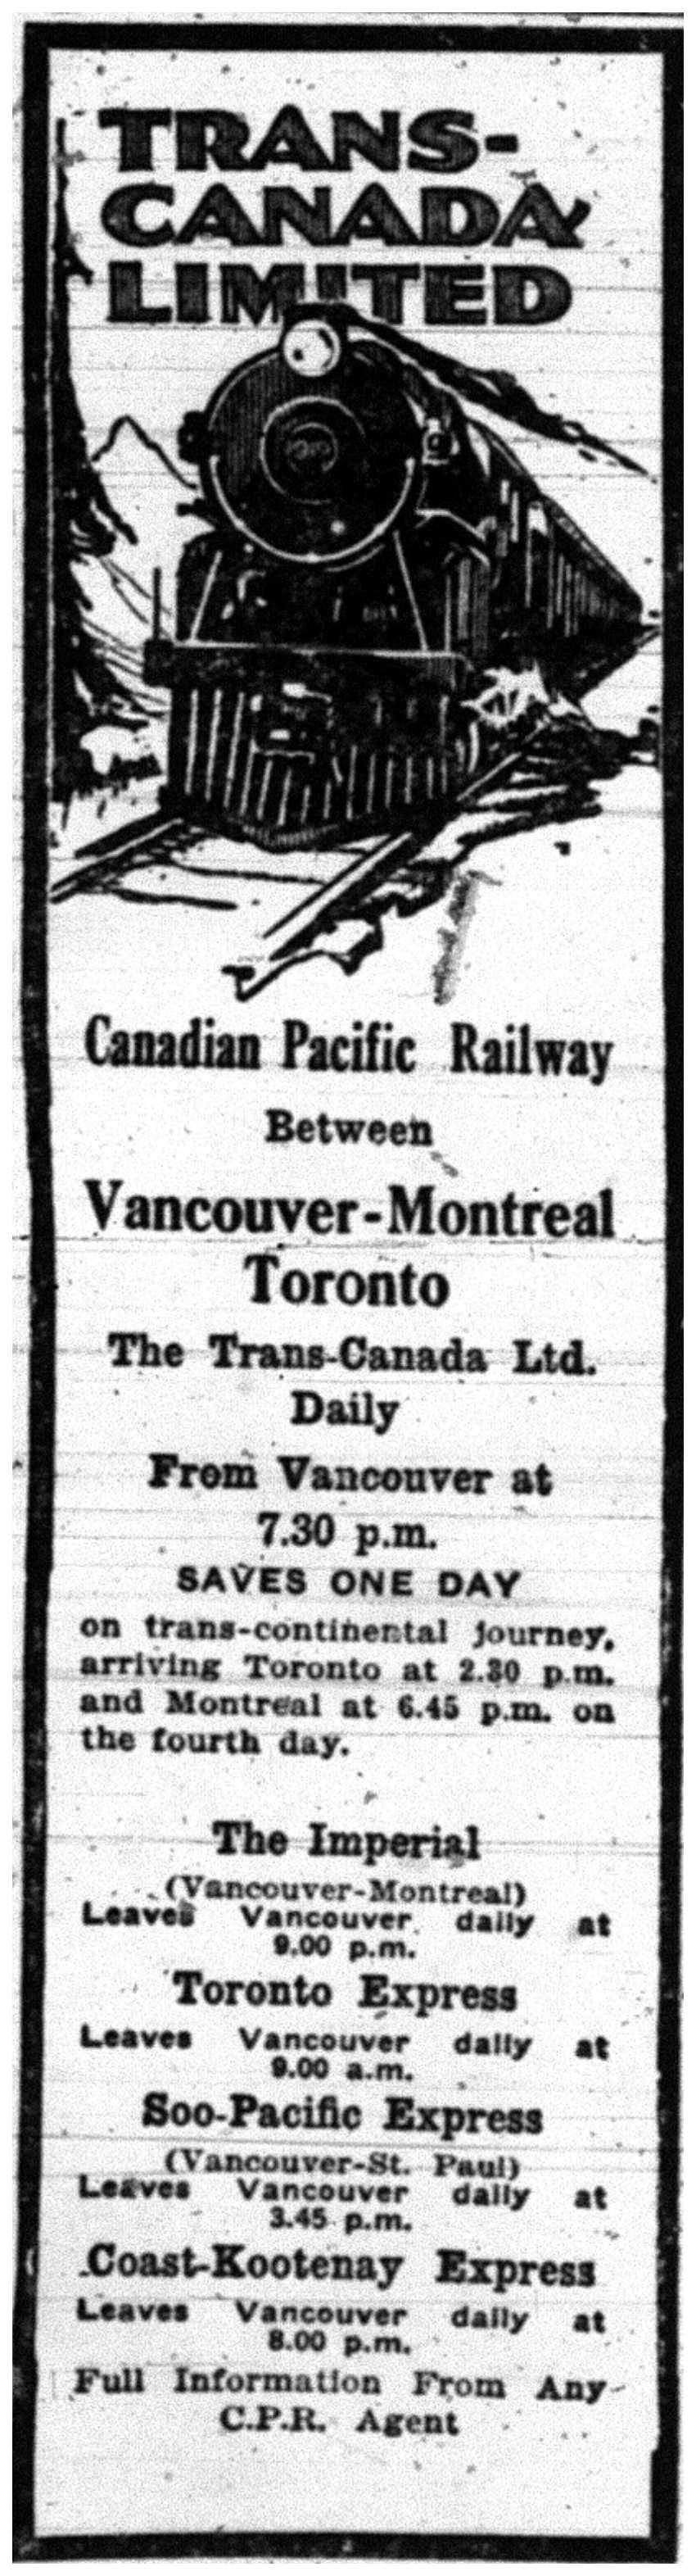 "Trans-Canada Limited"